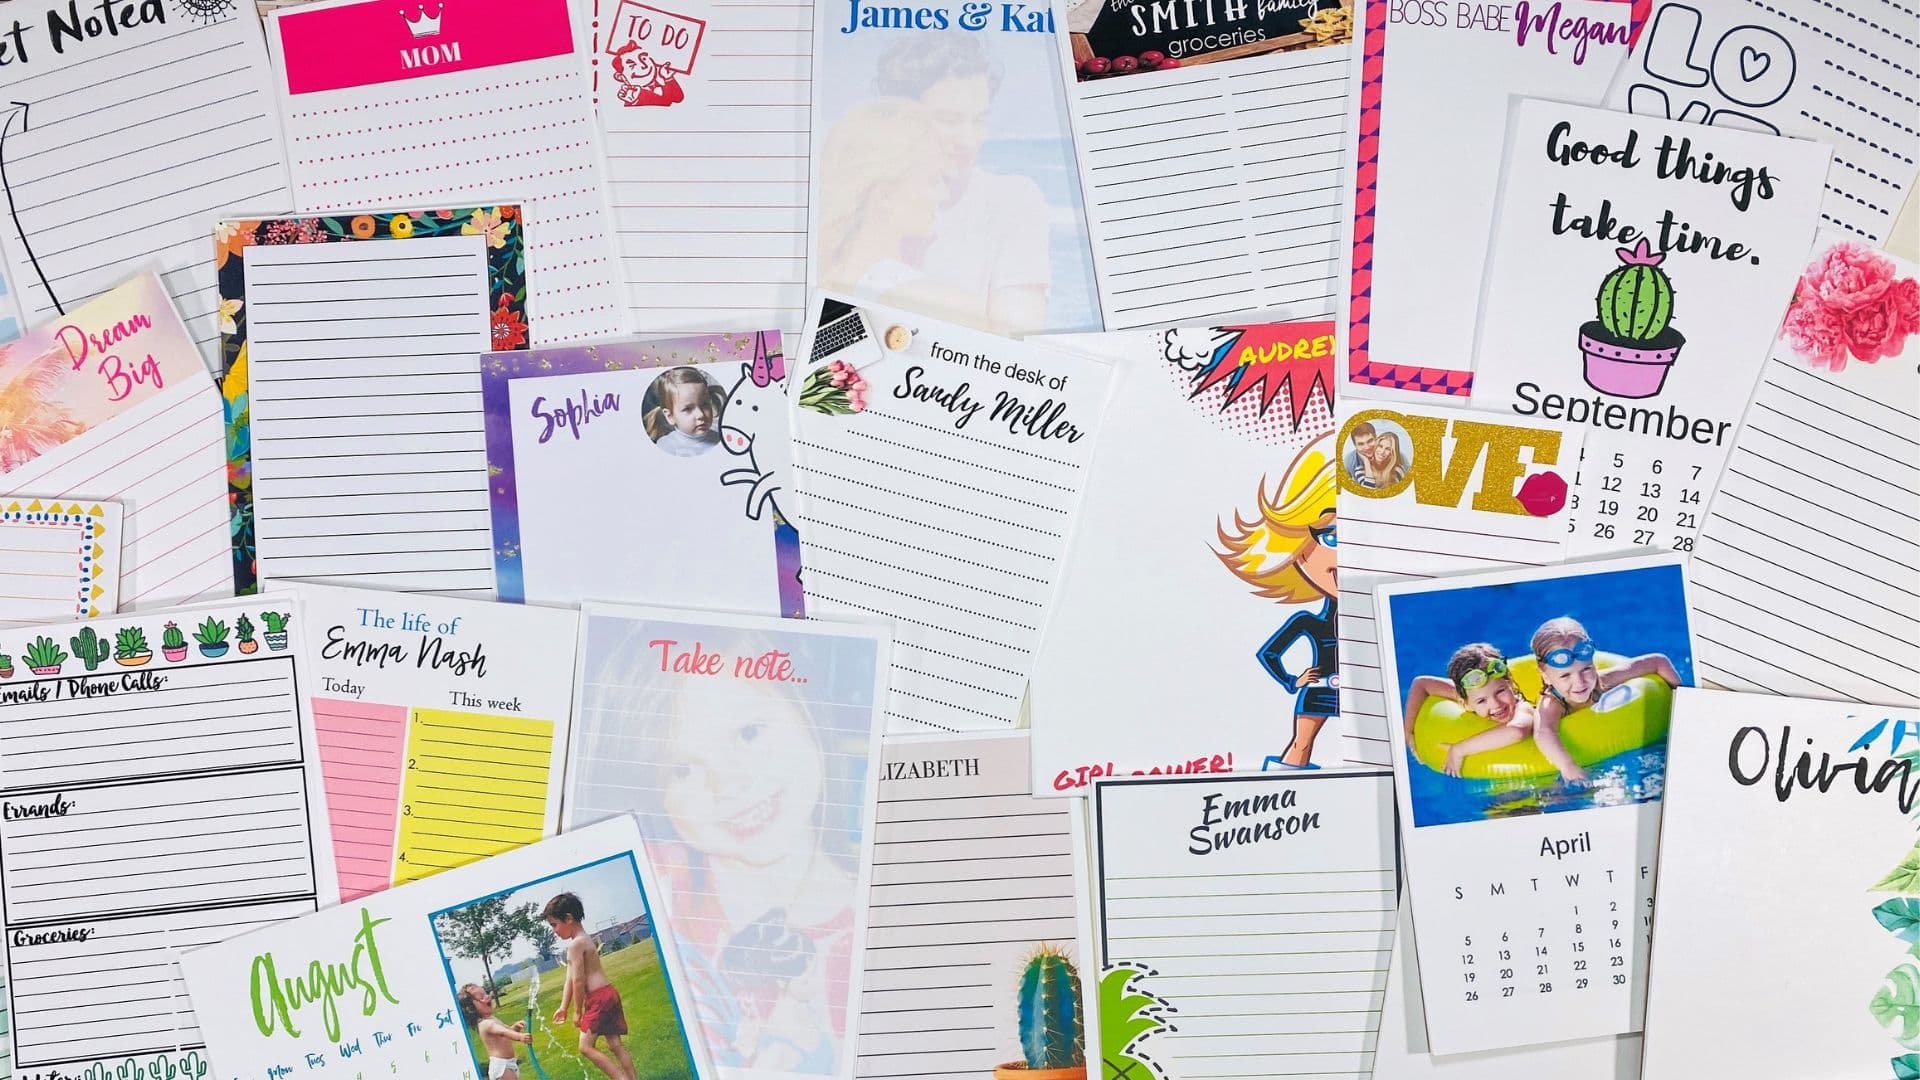 a tablefull of notepads and calendars printed on Get-Noted diynotepads as examples.